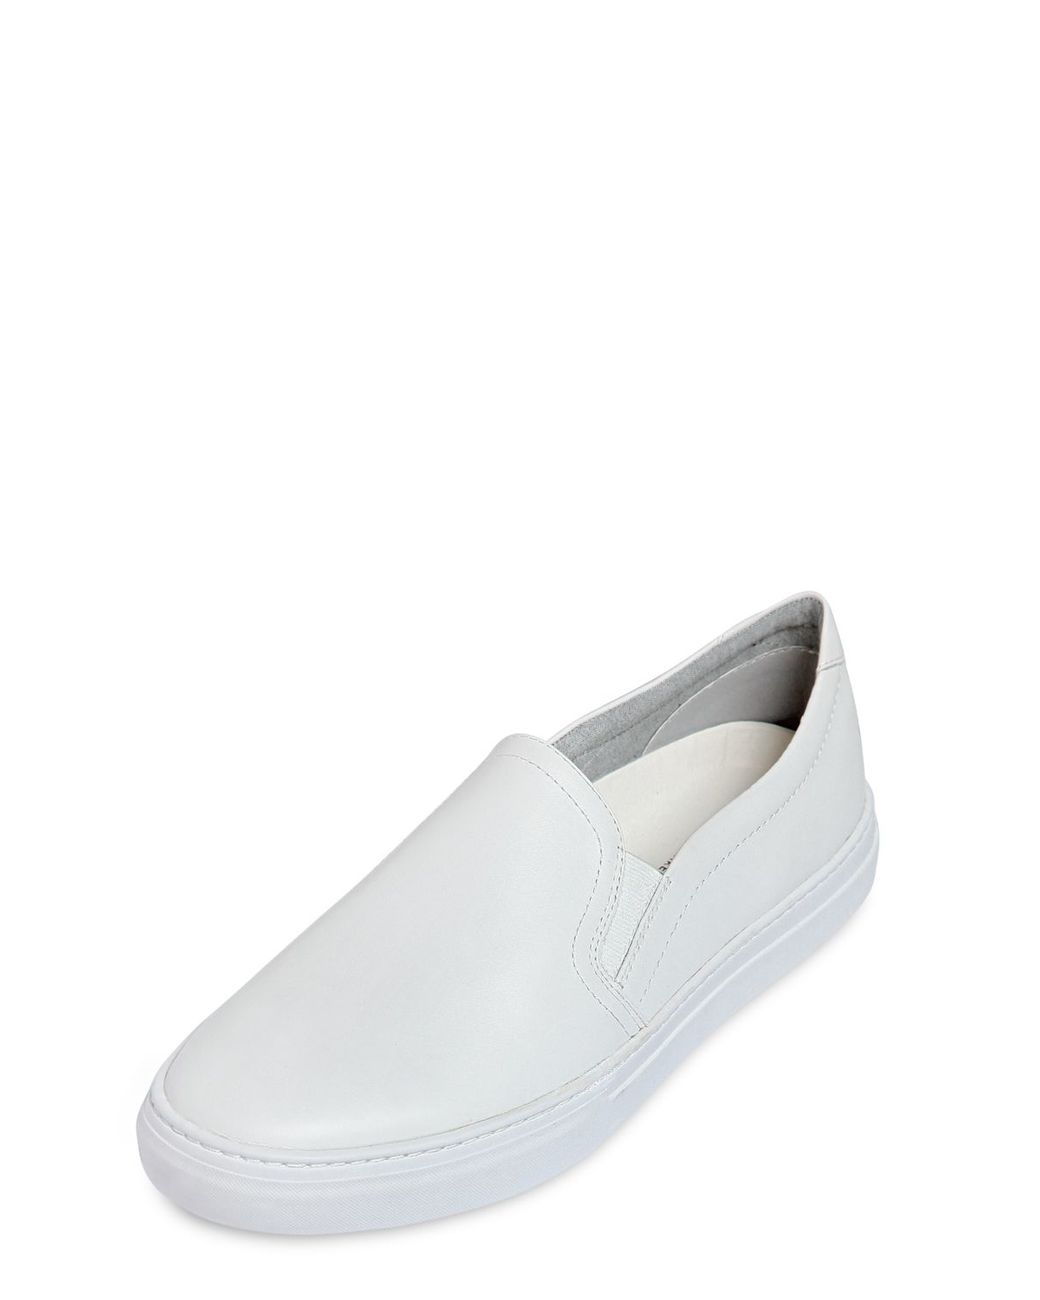 Vagabond Shoemakers Leather Slip-on Sneakers in White for Men | Lyst